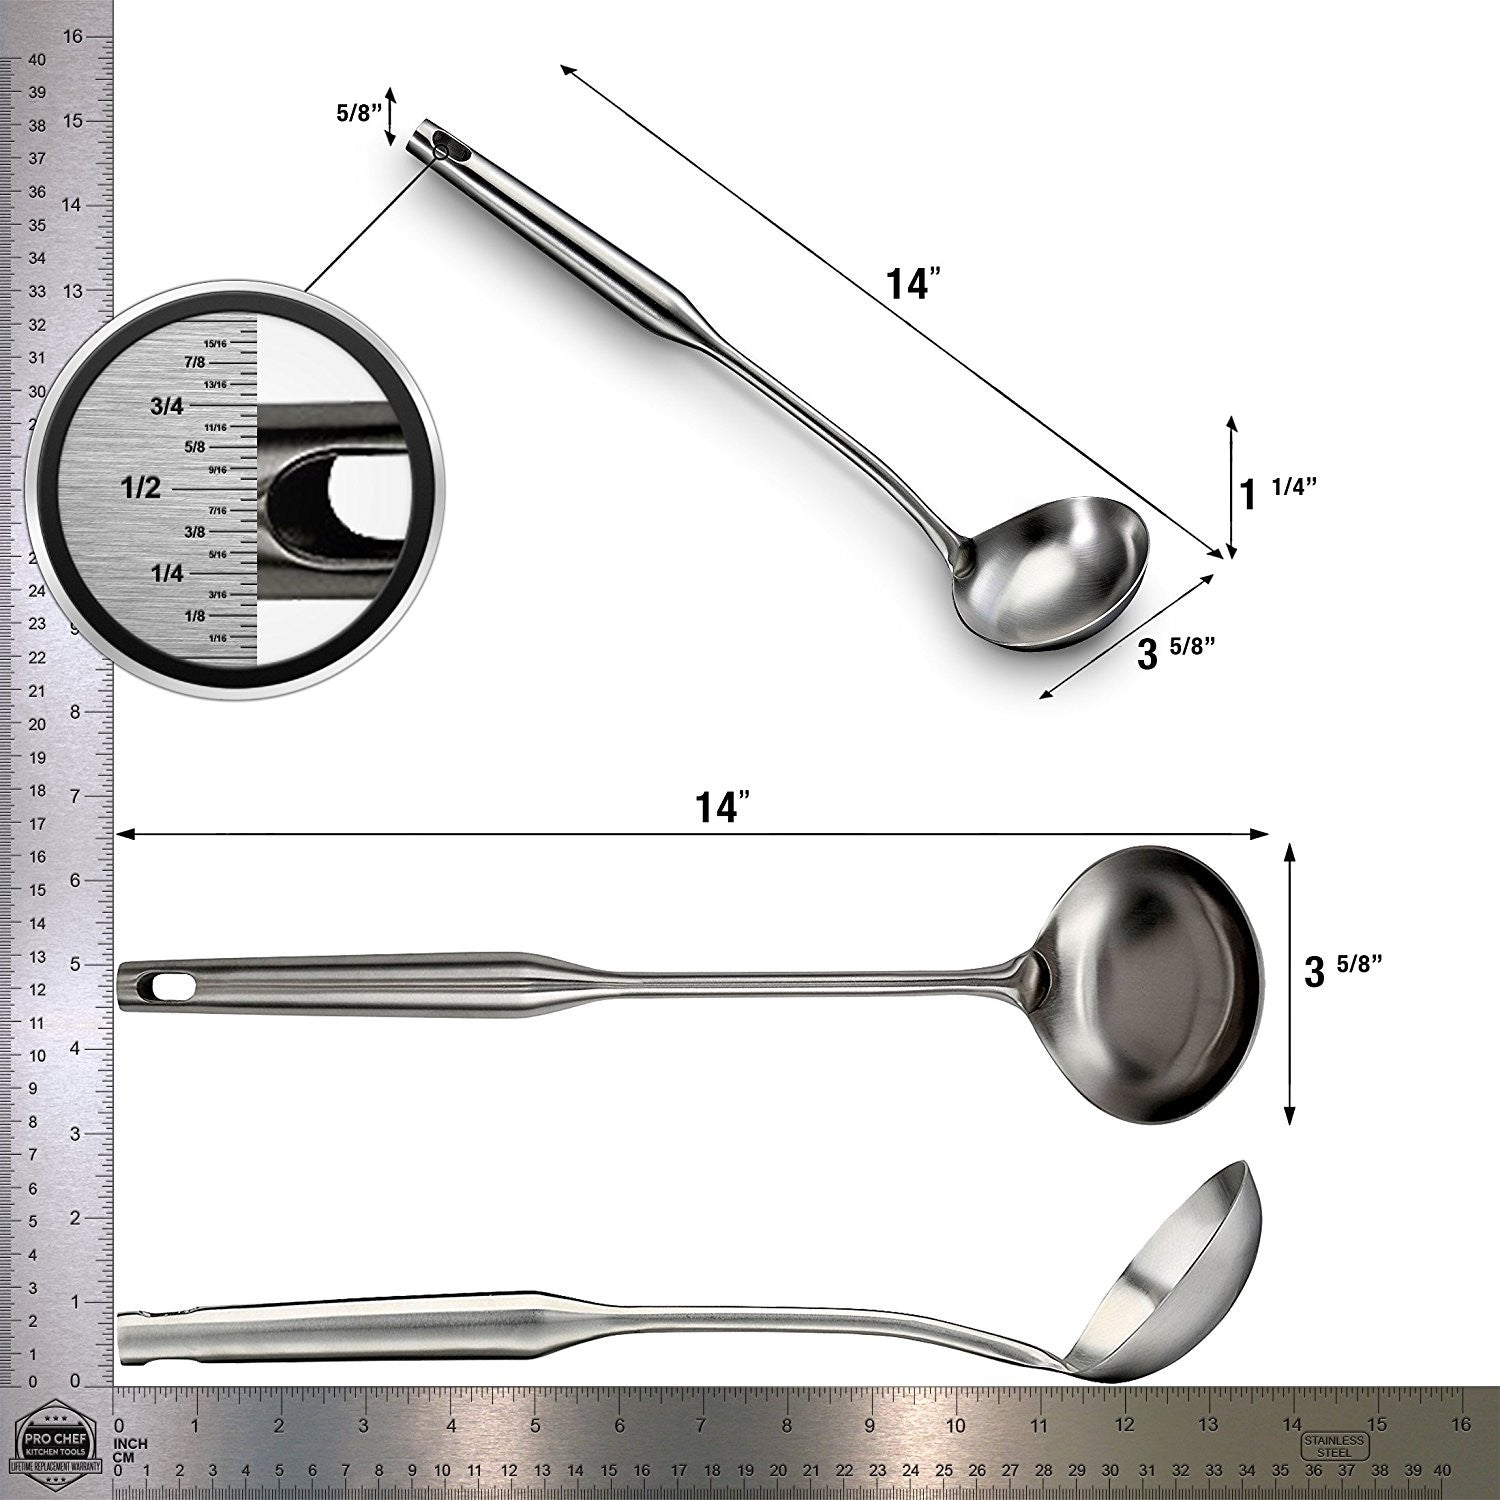 Kitchen Utensils by Corona, 2 Ladles soup and Canning and a Masher